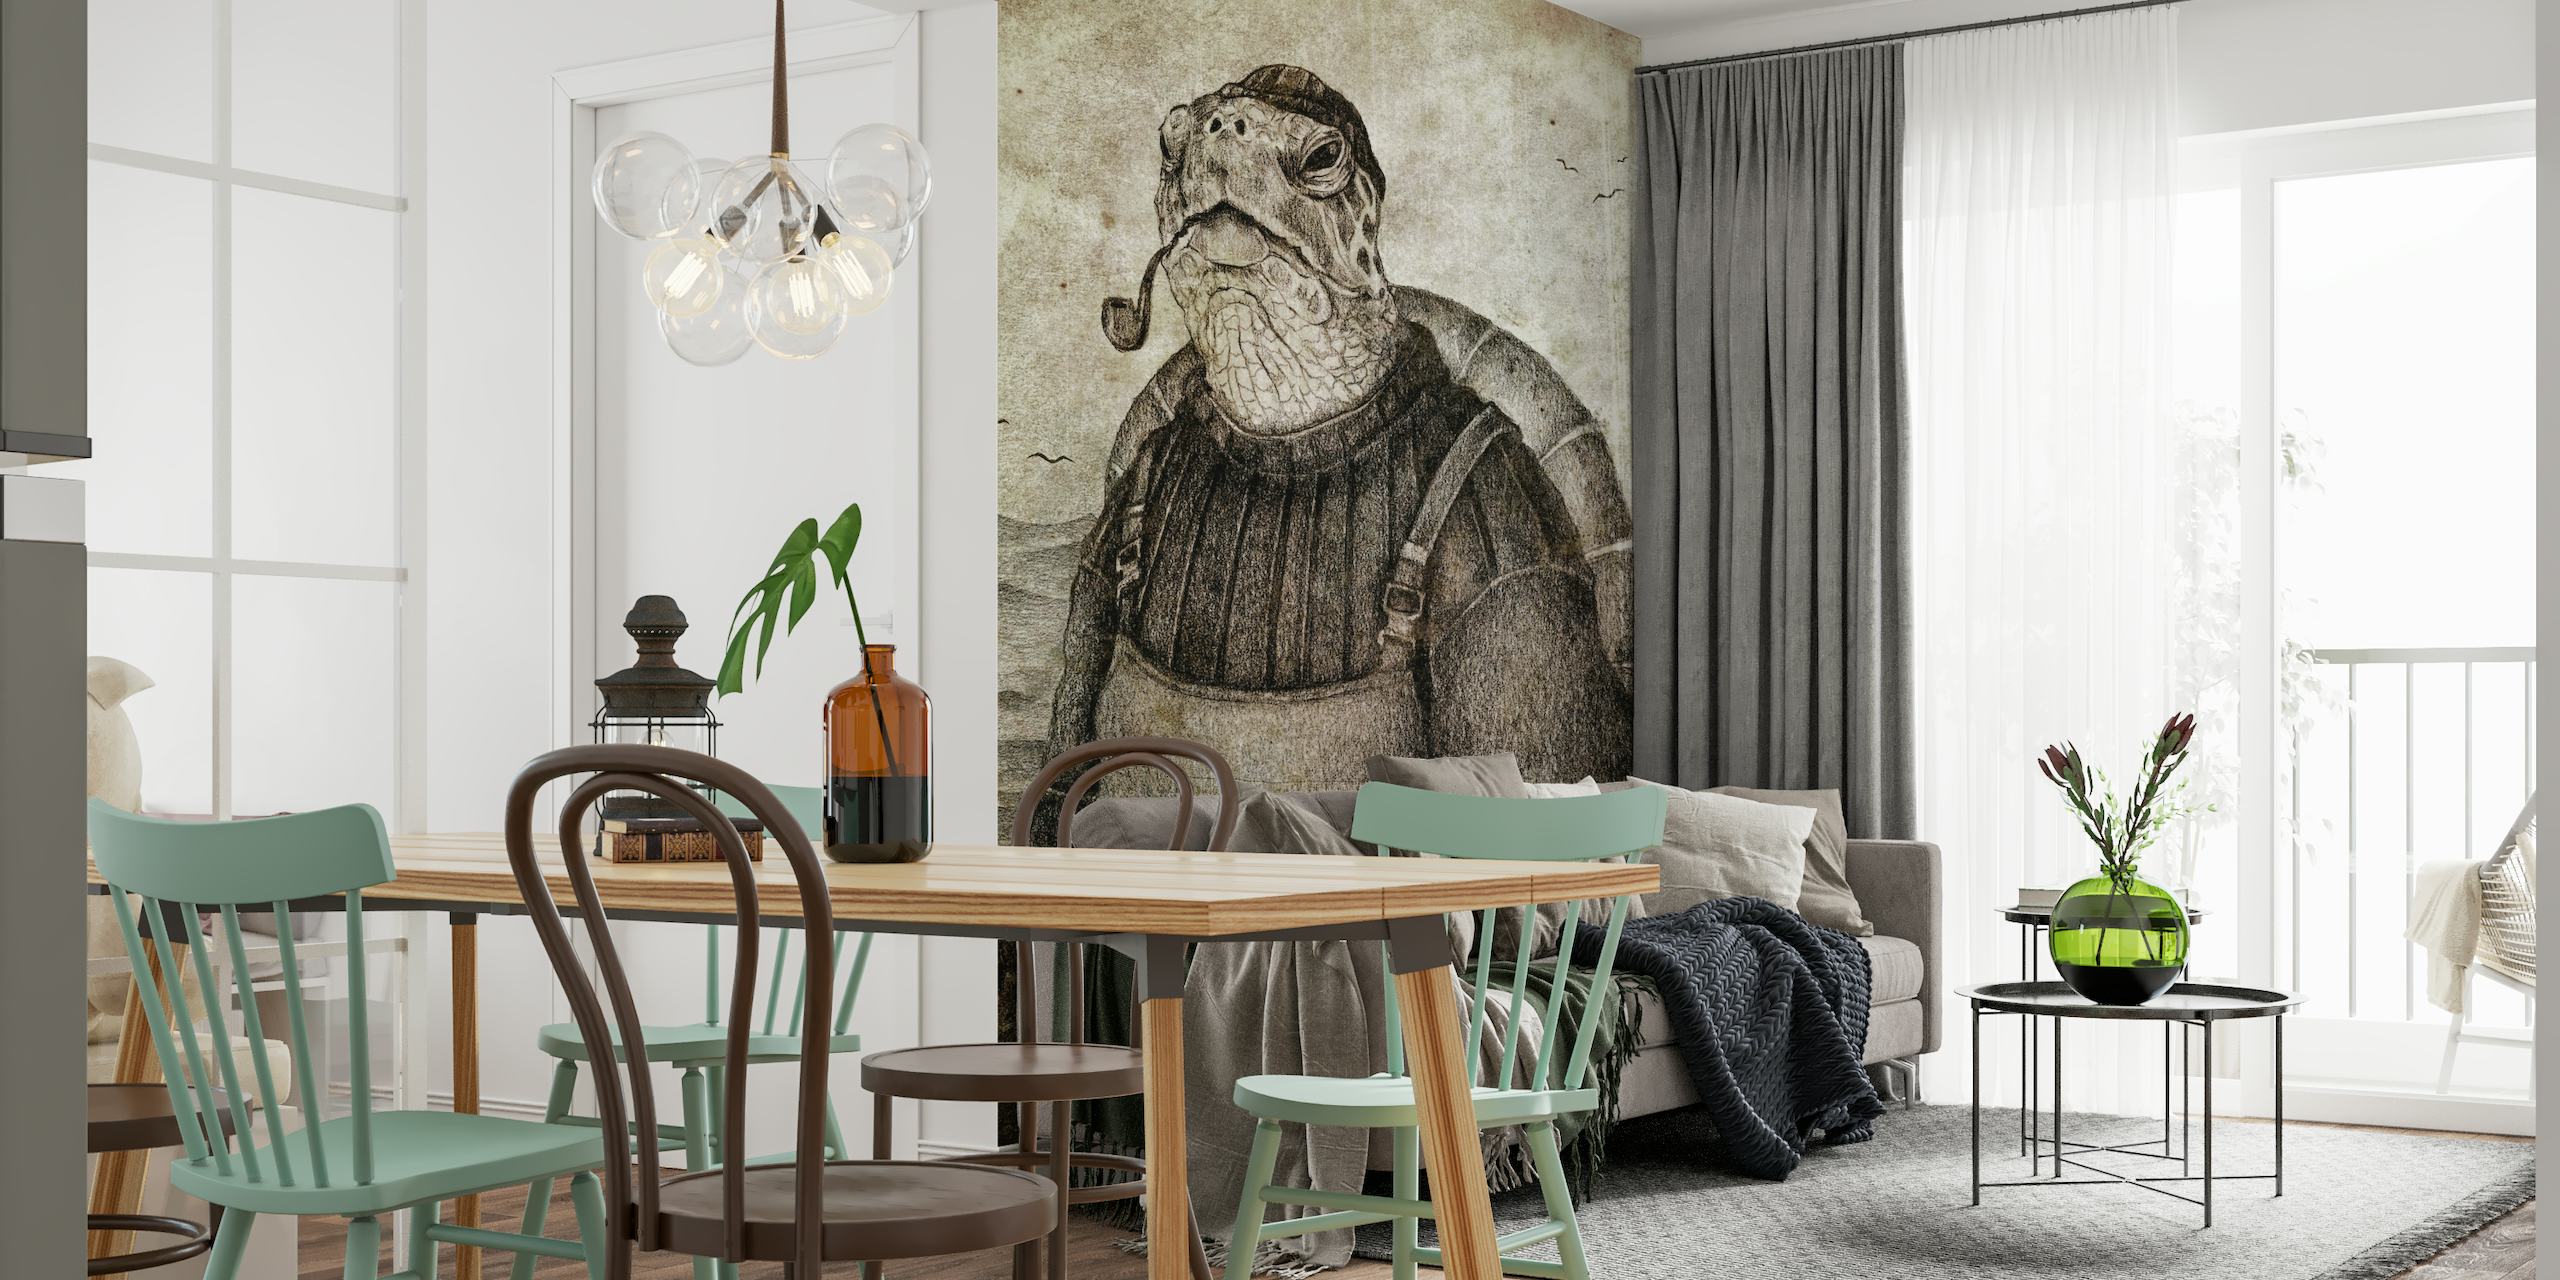 Nautical-themed wall mural featuring a rustic sea captain standing firmly, with a sepia vintage backdrop.